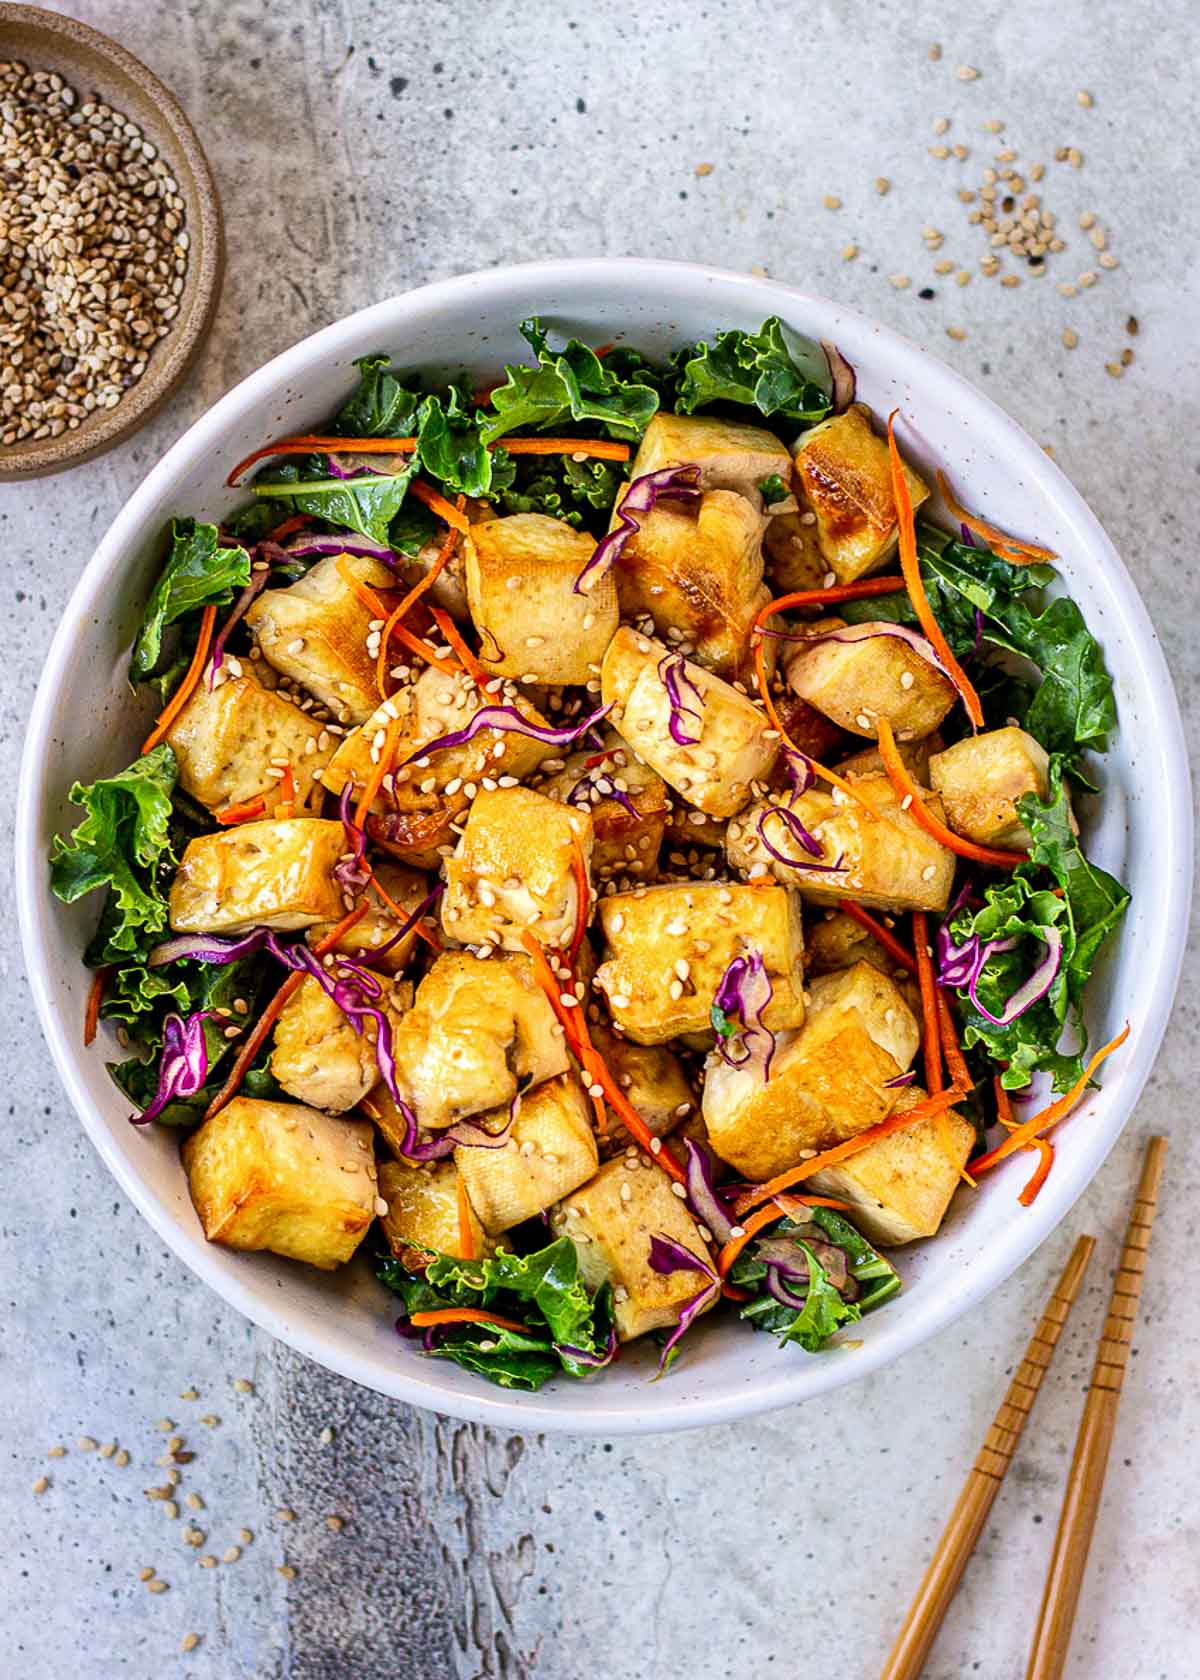 Bowl of broiled healthy tofu with kale, cabbage, carrot and sesame seeds. Chopsticks and bowl of sesame seeds nearby.